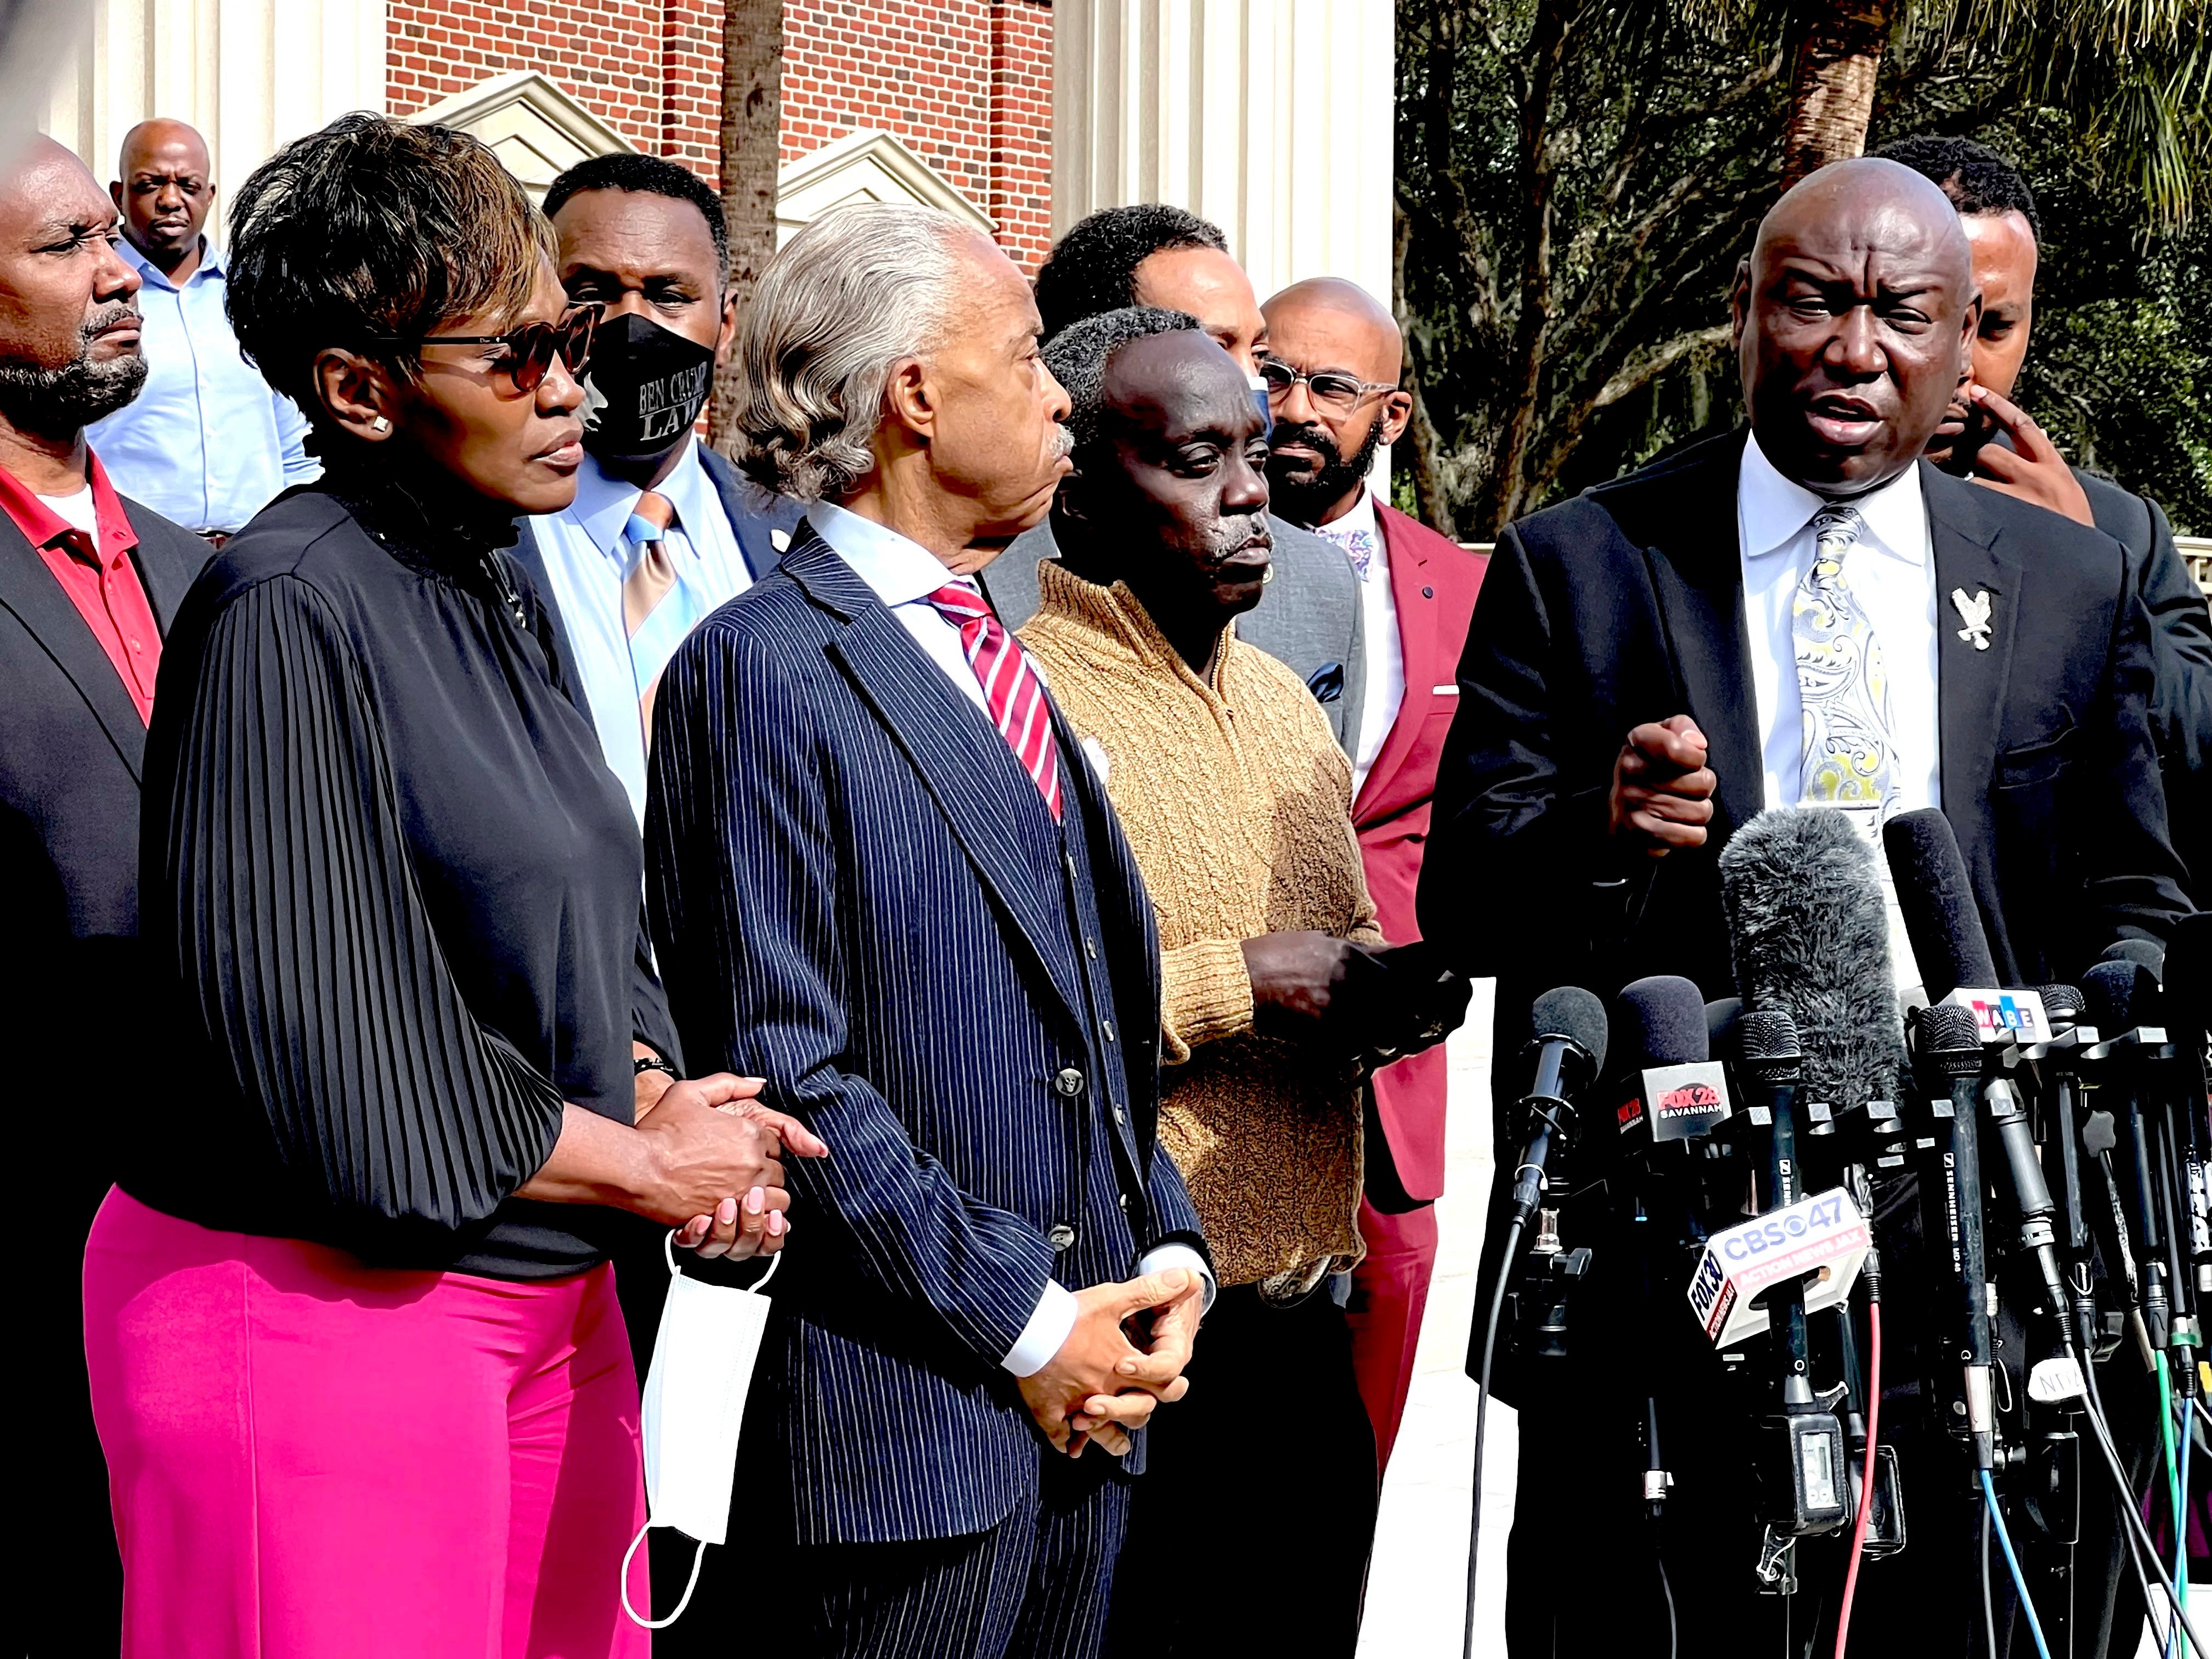 The Arbery family attorney Ben Crump, Rev. Al Sharpton and Ahmaud Arbery’s family outside the courthouse on Wednesday